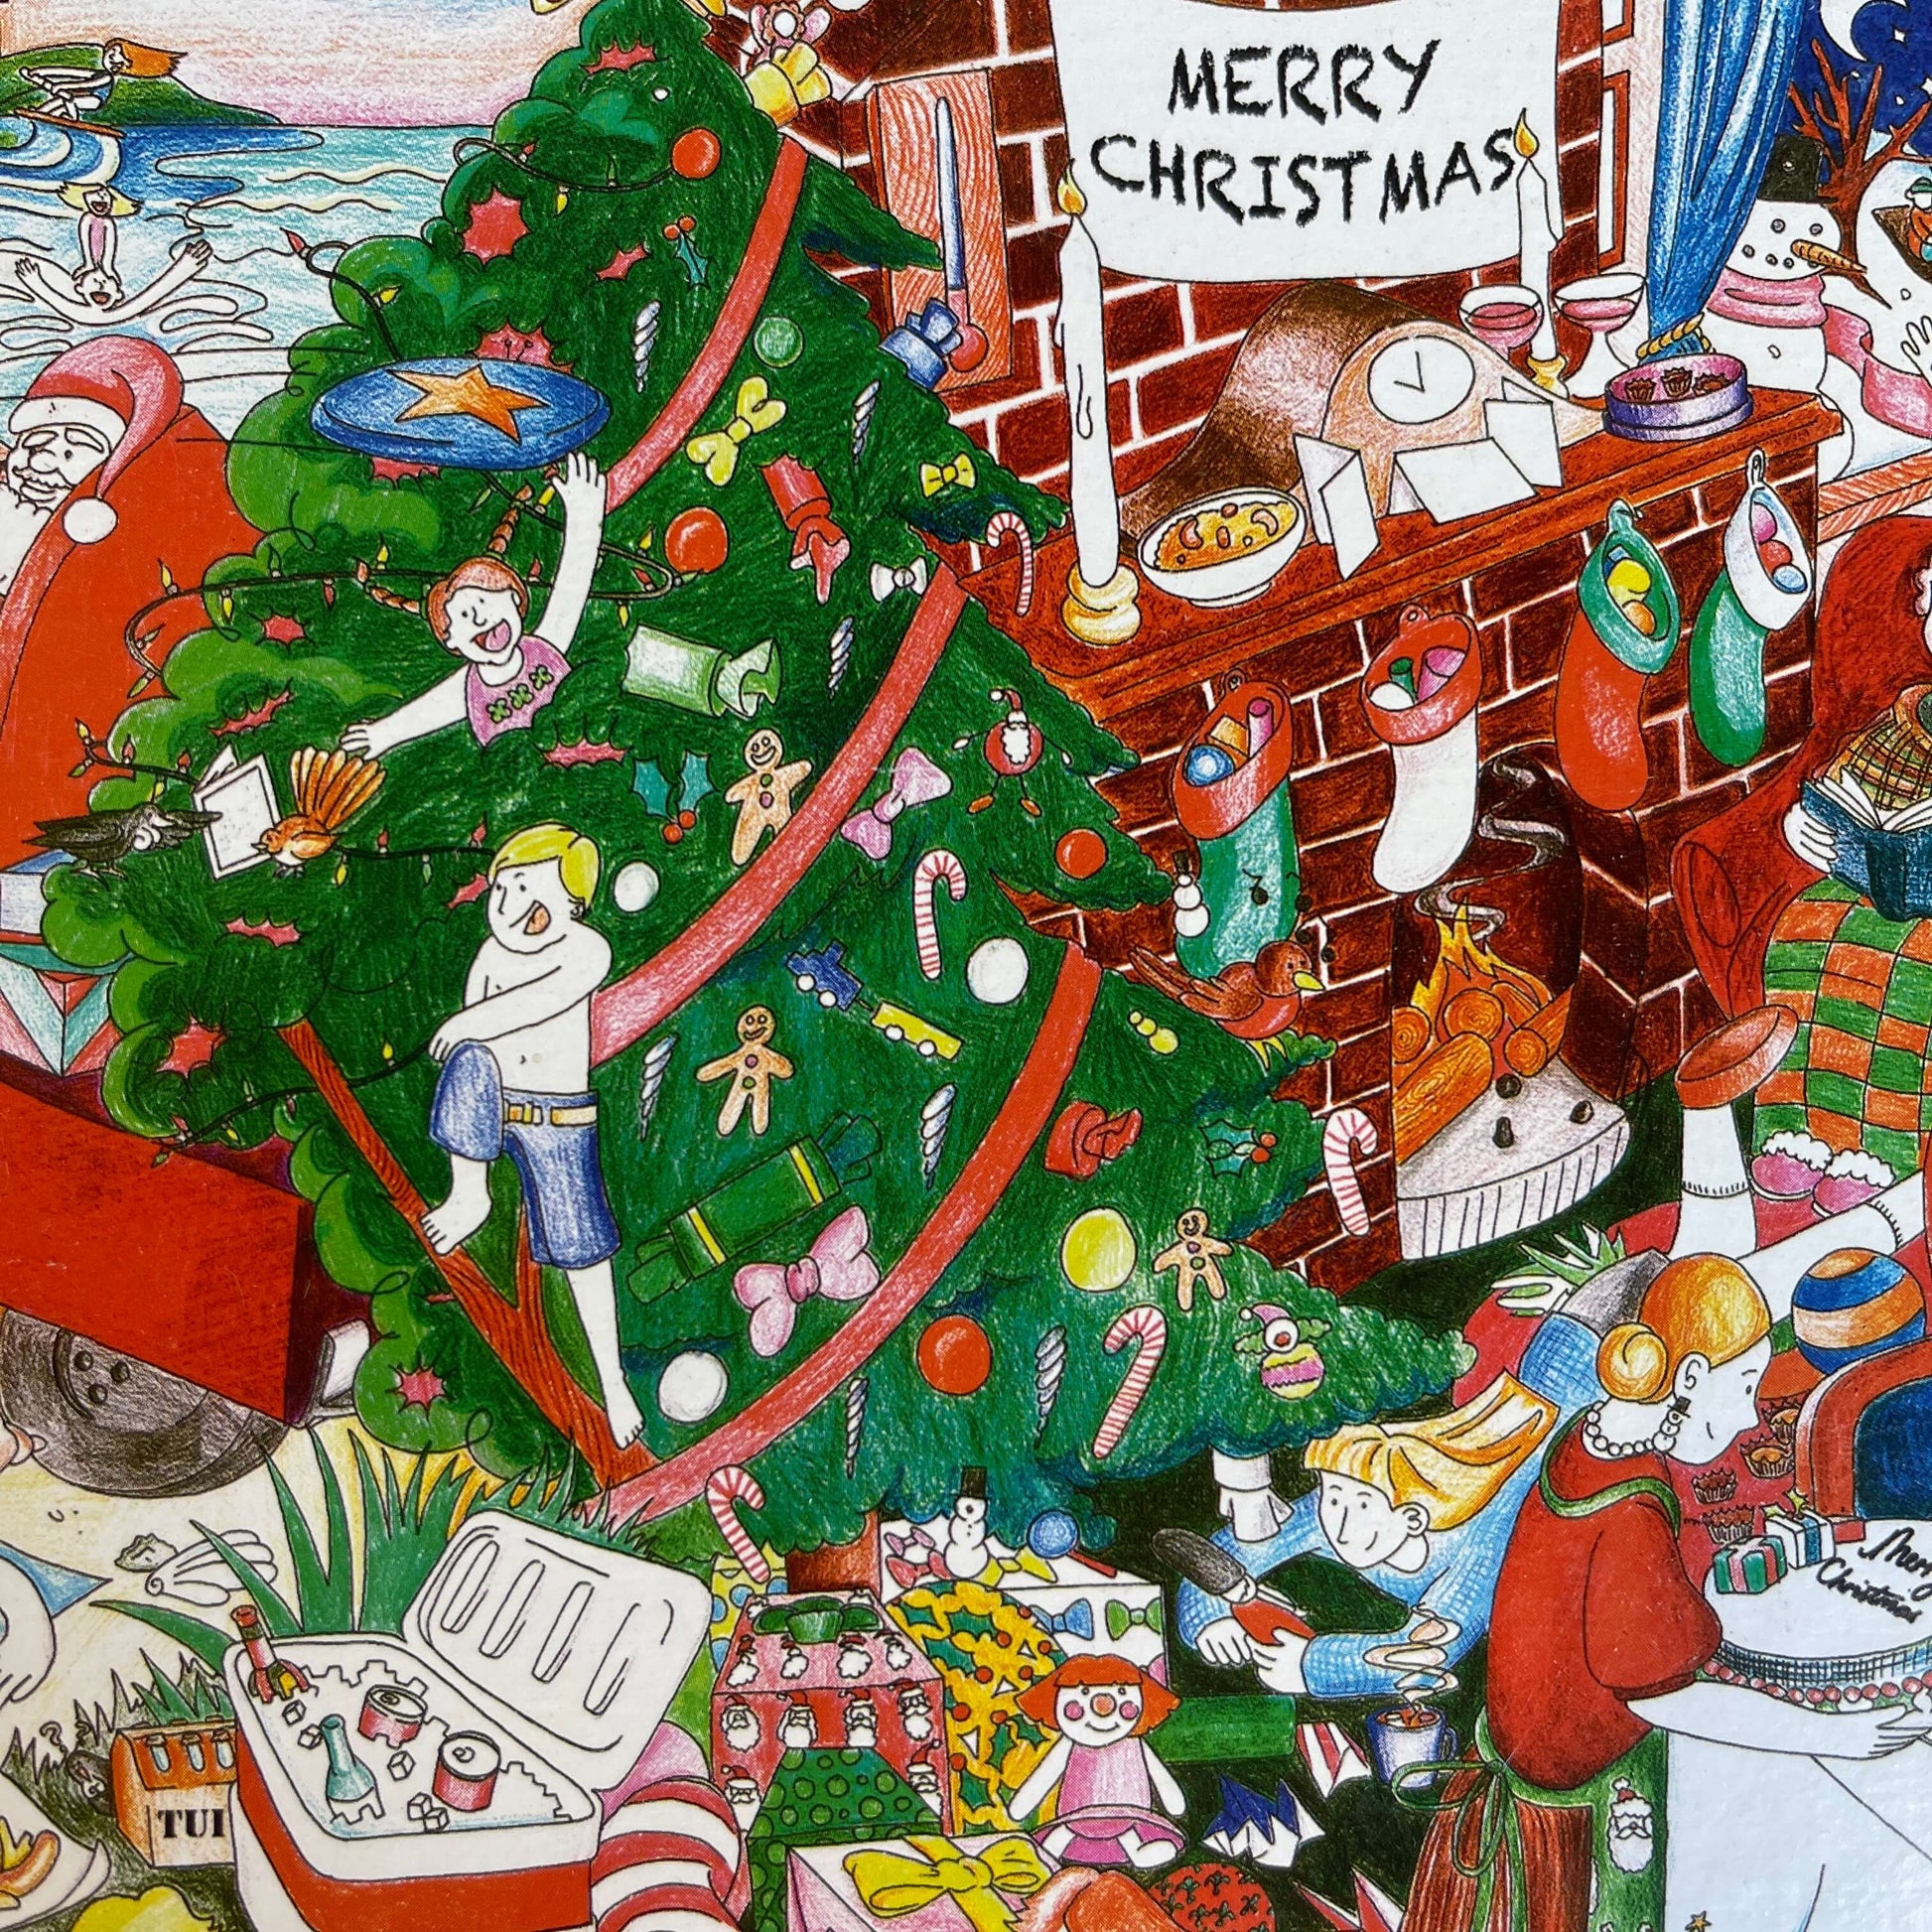 Close up of a jigsaw puzzle artwork featuring a Christmas scene..